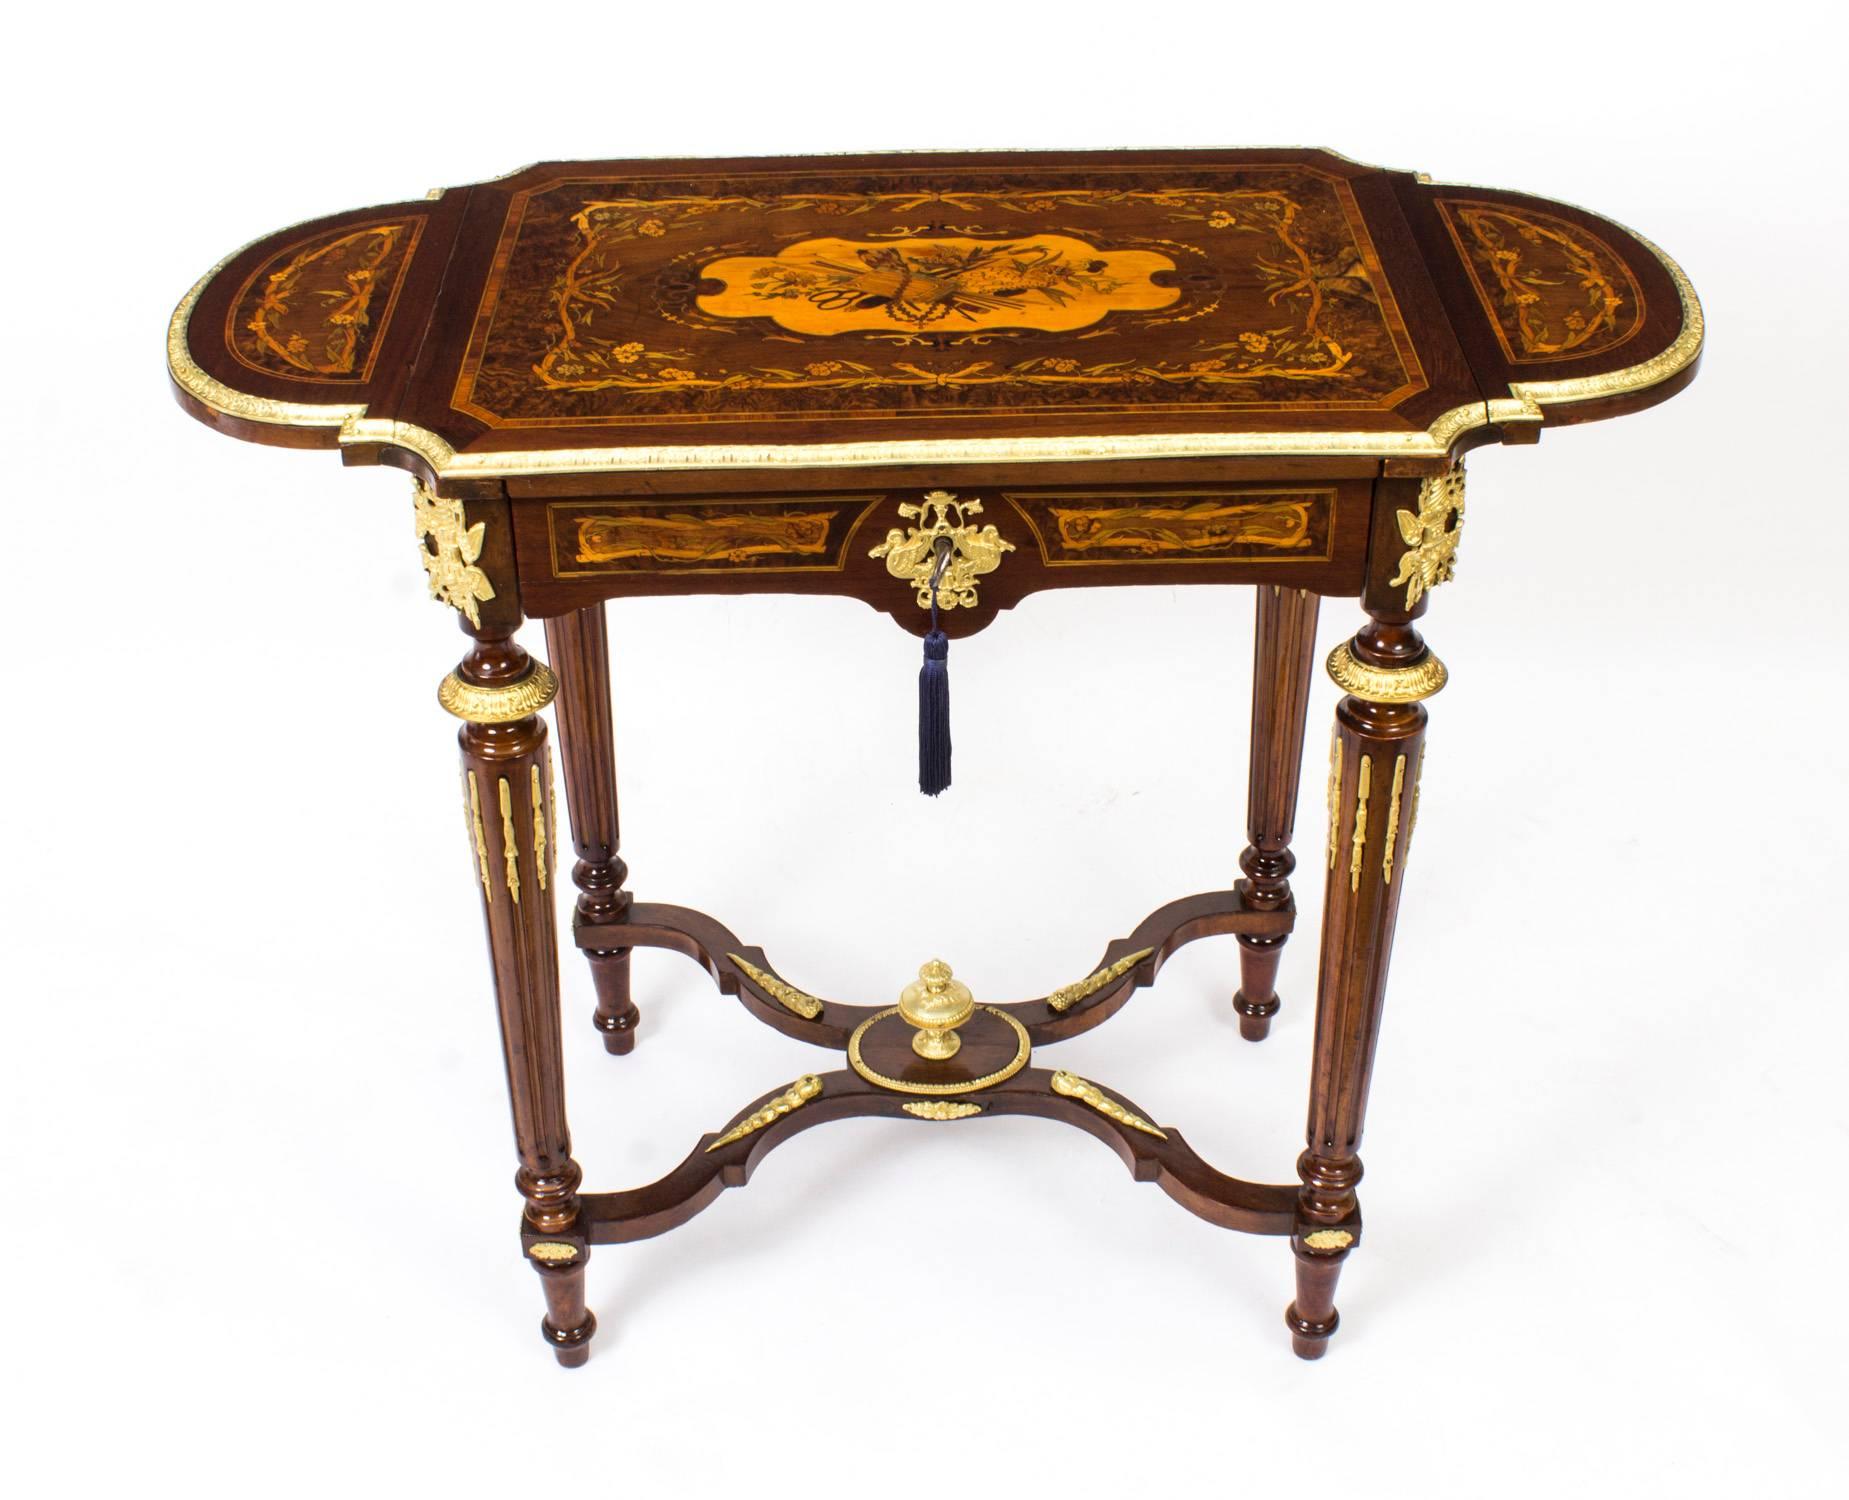 This is a beautiful antique French Louis XV Revival marquetry ormolu-mounted Poudreuse or writing table, circa 1860 in date.

The stunning marquetry lift up top is fitted with a mirror on the underside and has a flap on each side and they can be